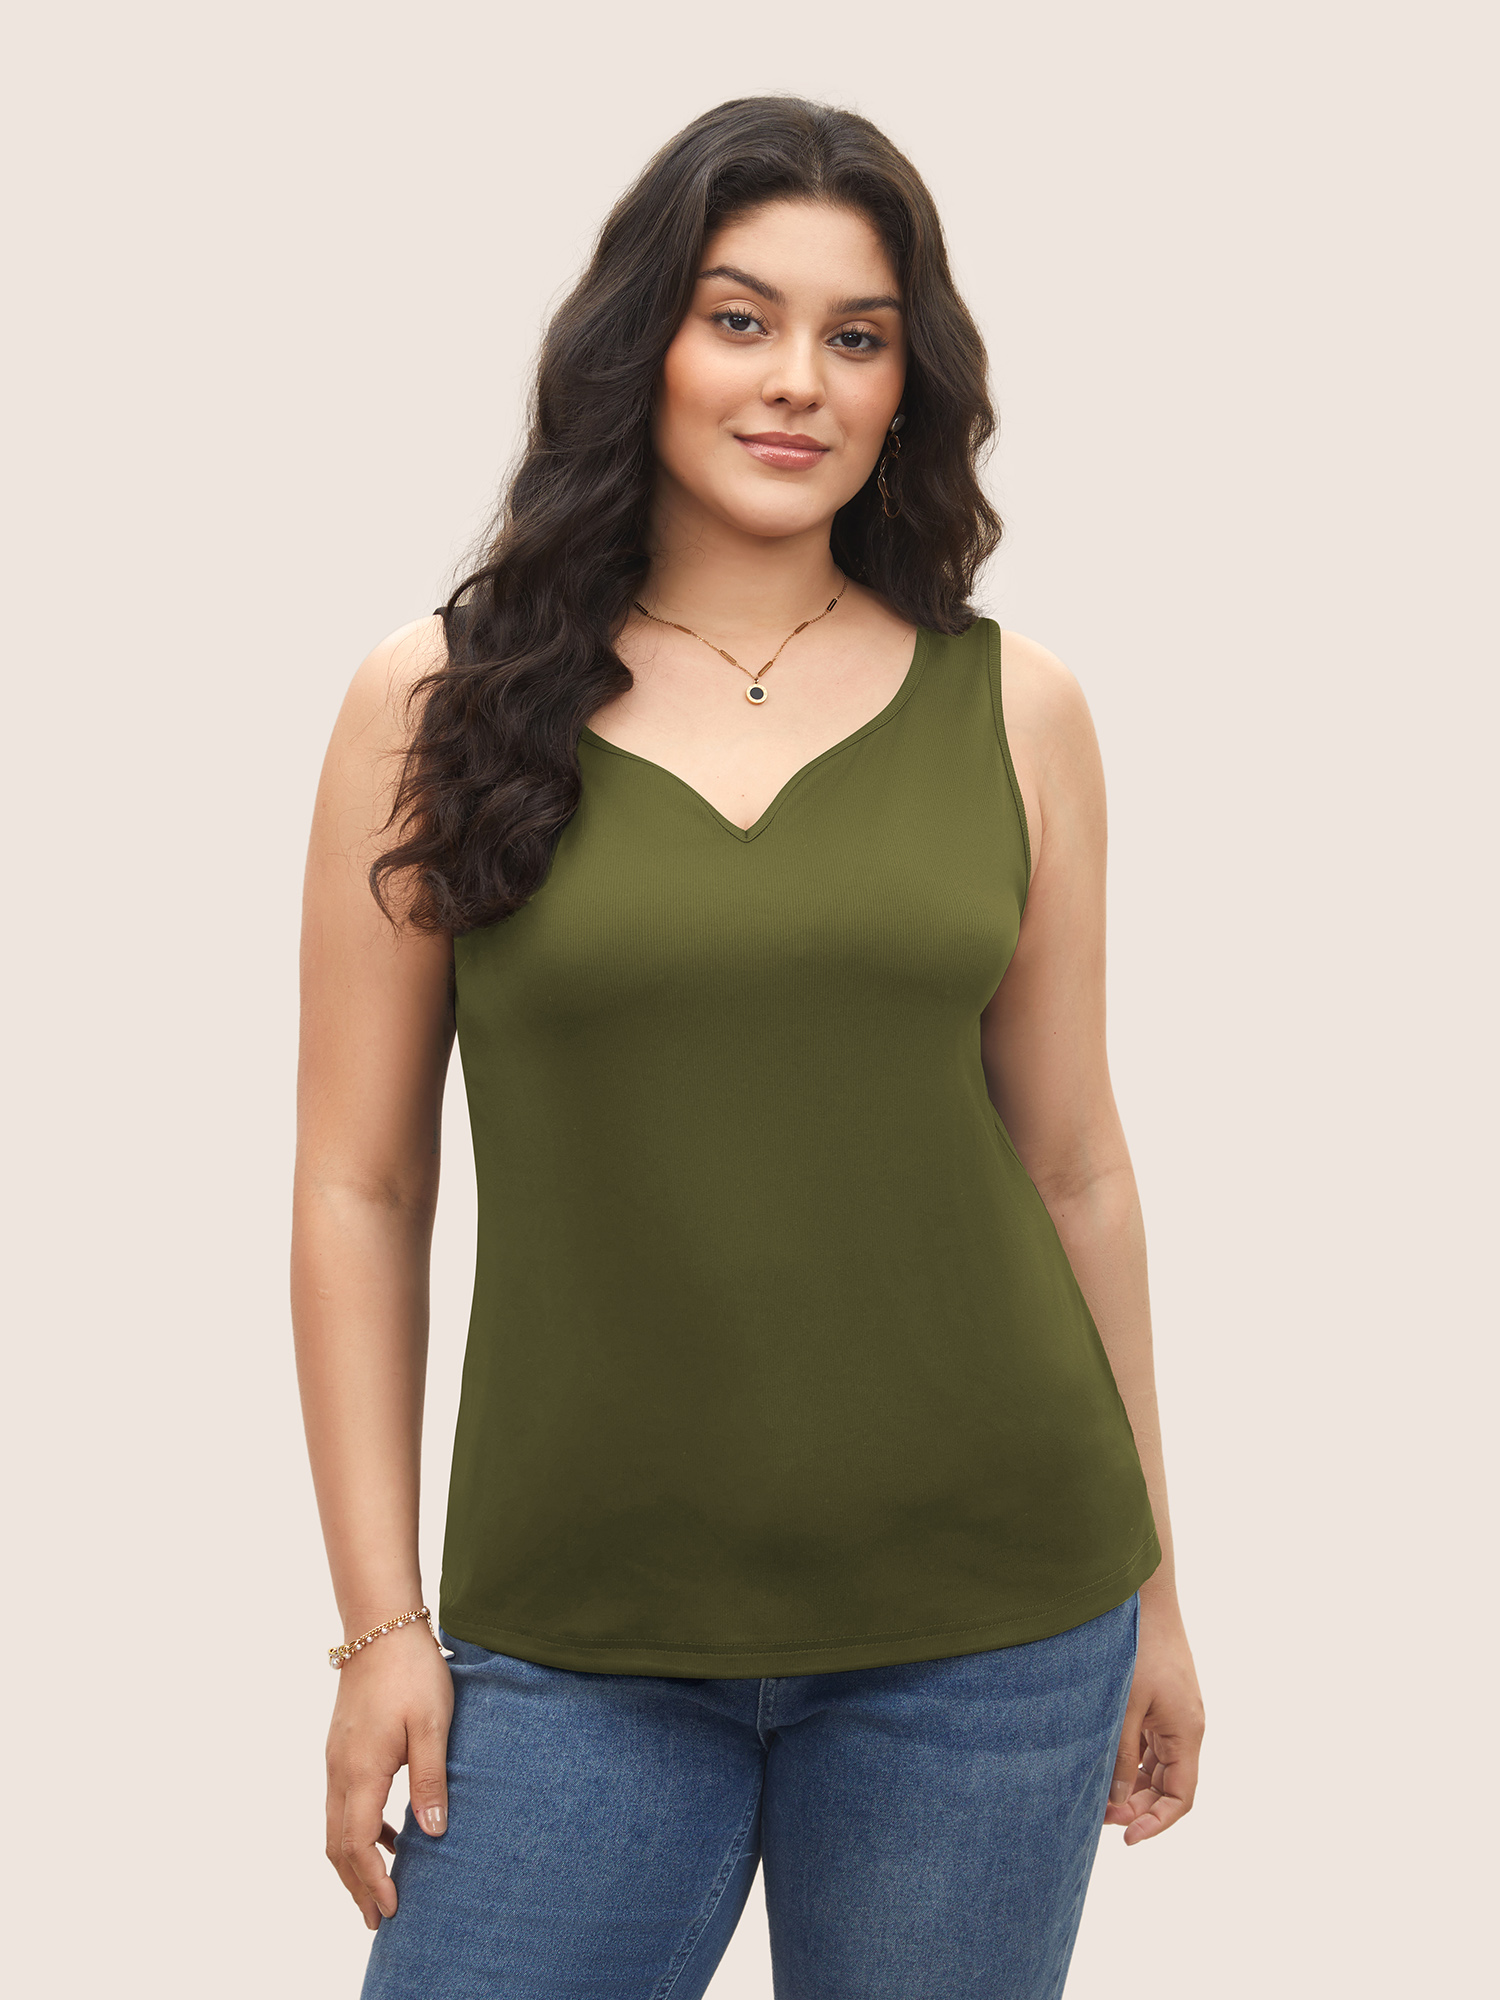 

Plus Size Solid Rib Knit Heart Neckline Tank Top Women ArmyGreen Casual Heart neckline Everyday Tank Tops Camis BloomChic